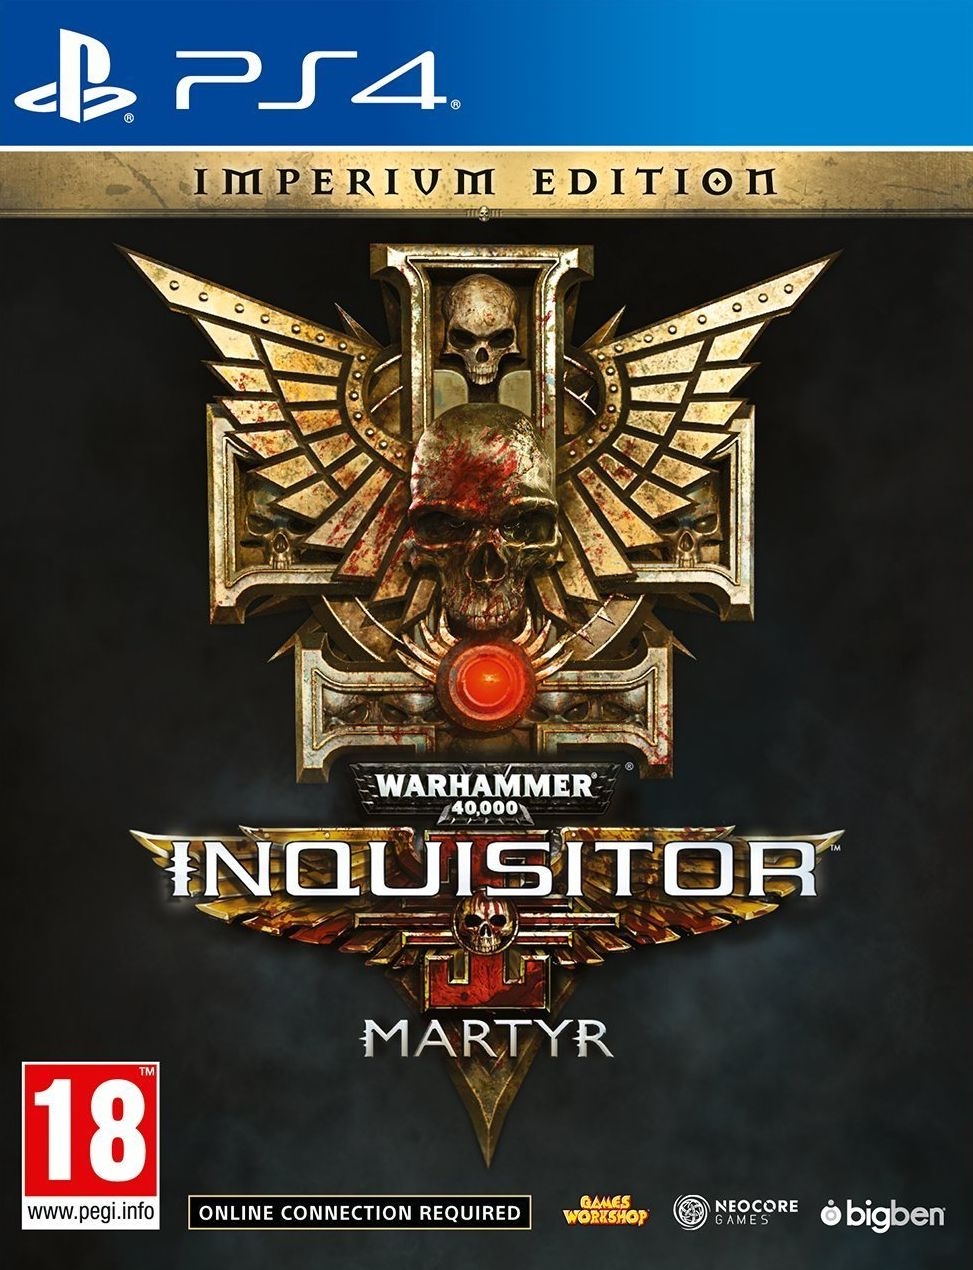 PS4 Warhammer 40K Inquisitor Martyr - Imperium Edition